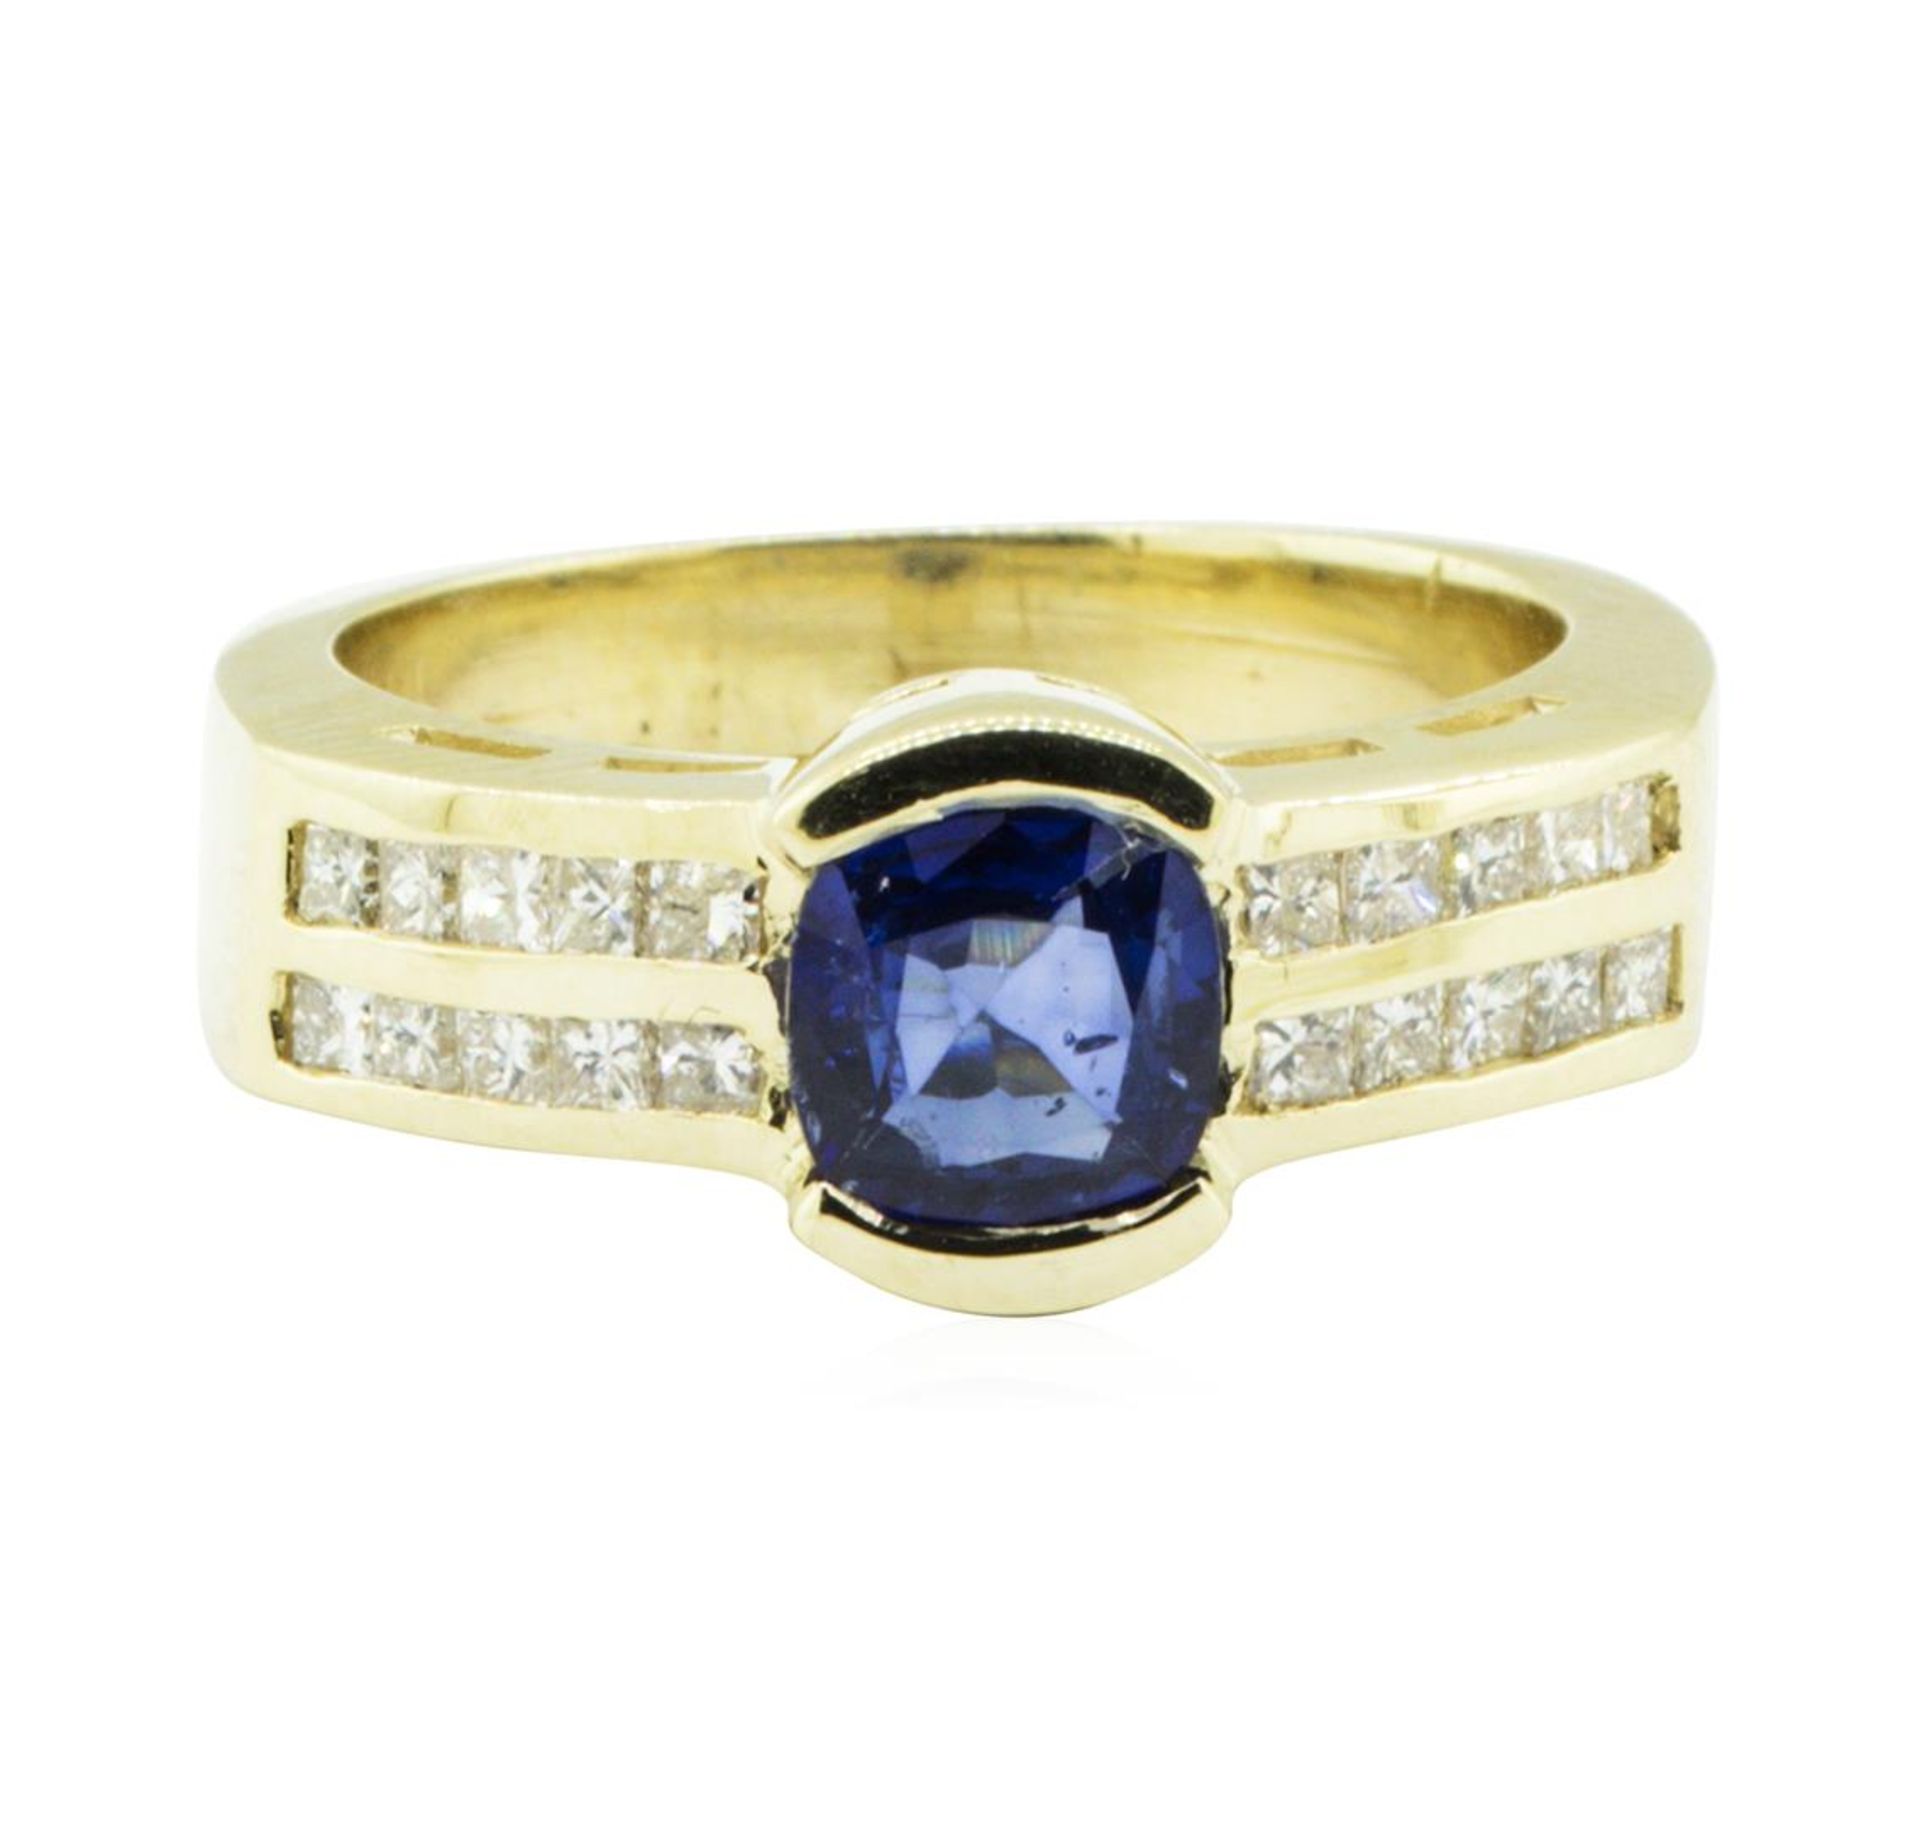 1.37 ctw Square Cushion Brilliant Blue Sapphire And Diamond Ring - 14KT Yellow G - Image 2 of 5